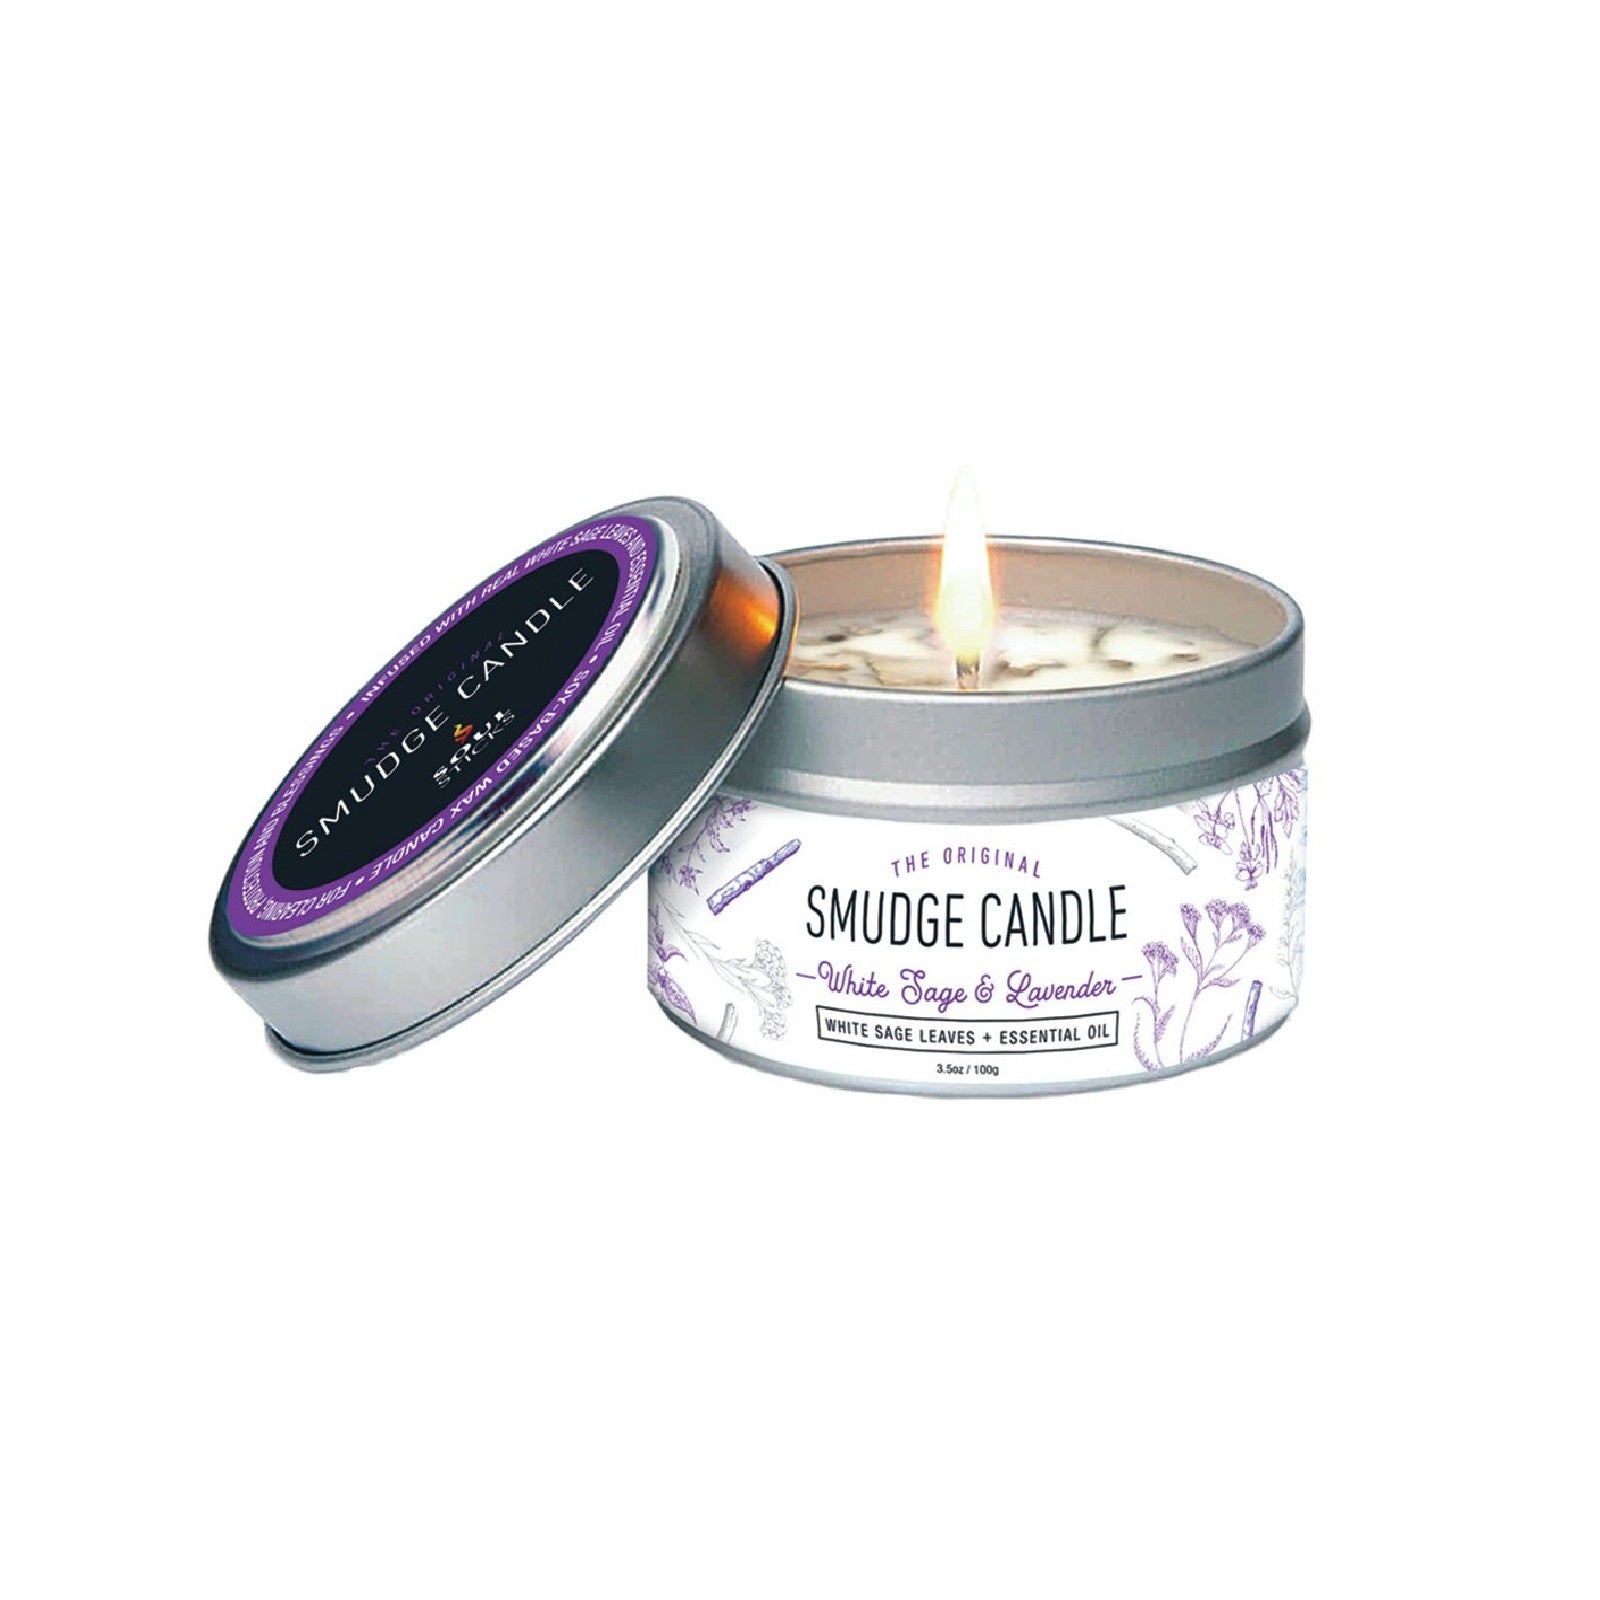 Soul Sticks White Sage and Lavender Smudge Candle Wax Soy Based 100g